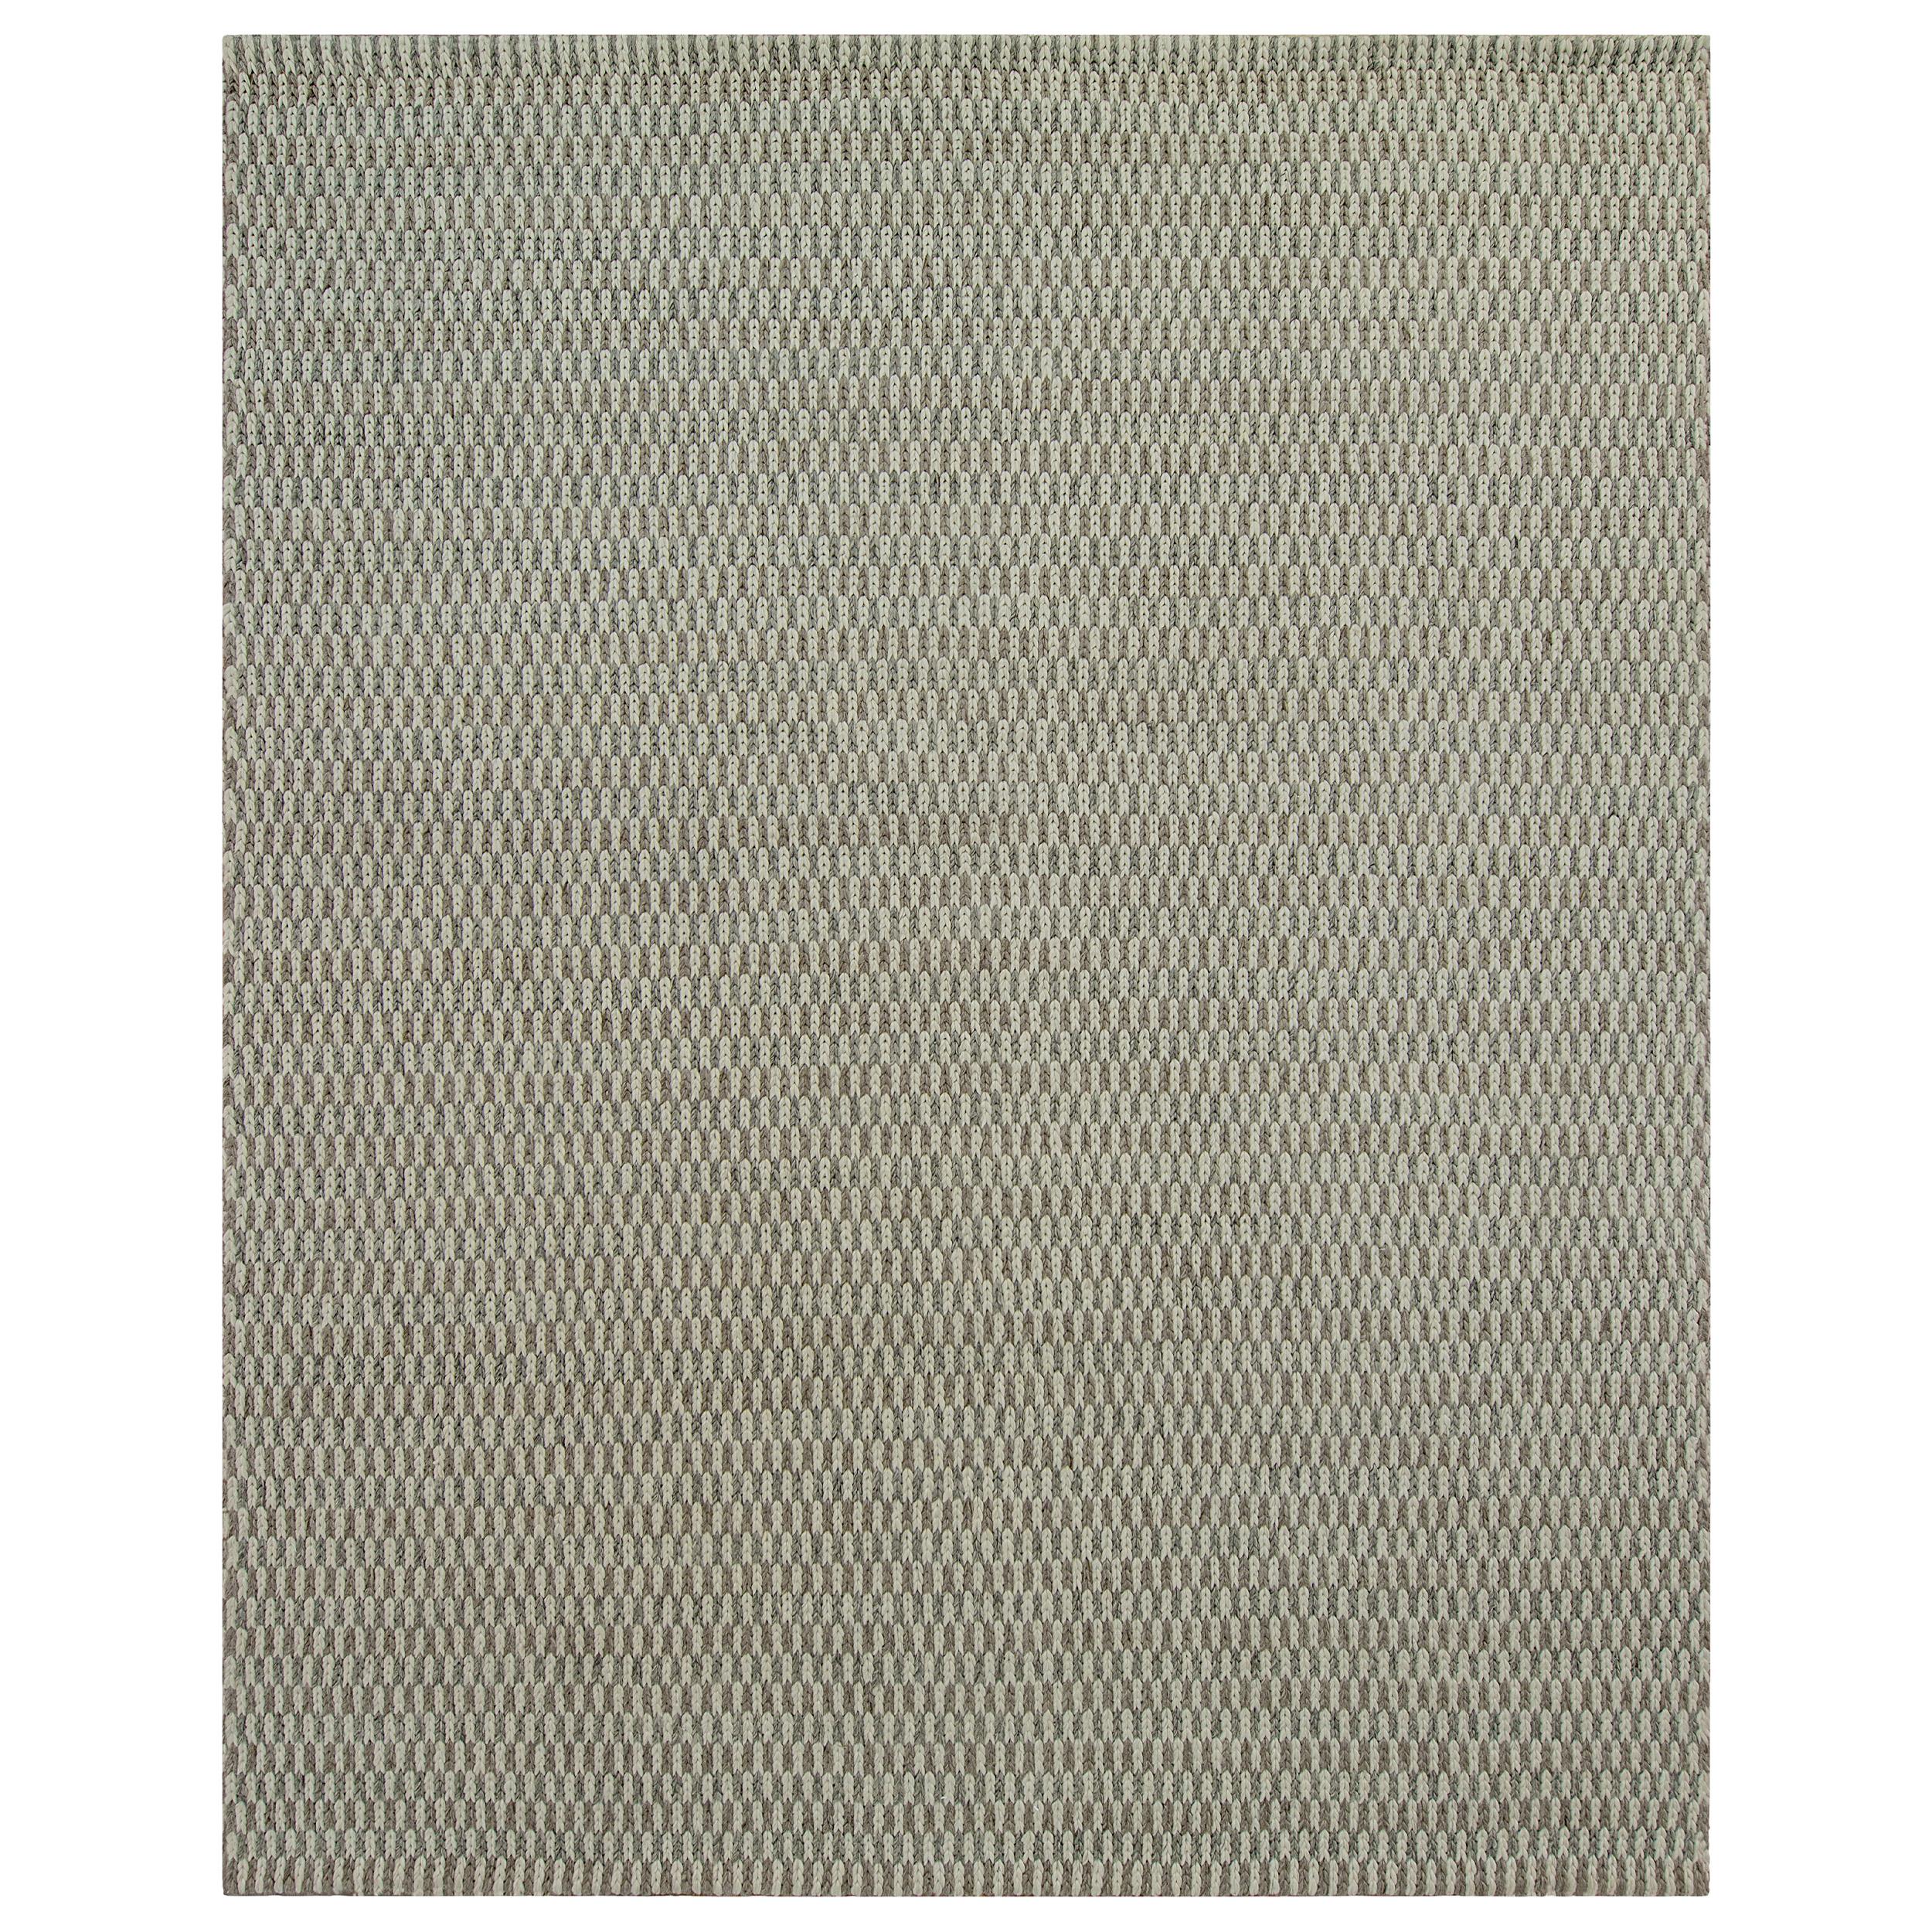 Luxurious modern hand-knotted rug from India, with a unique, one-of-a-kind look that'll present itself to being the finest piece in any home. The minimalist design gives a very modern look, being the perfect complement to any room. This rug is hand